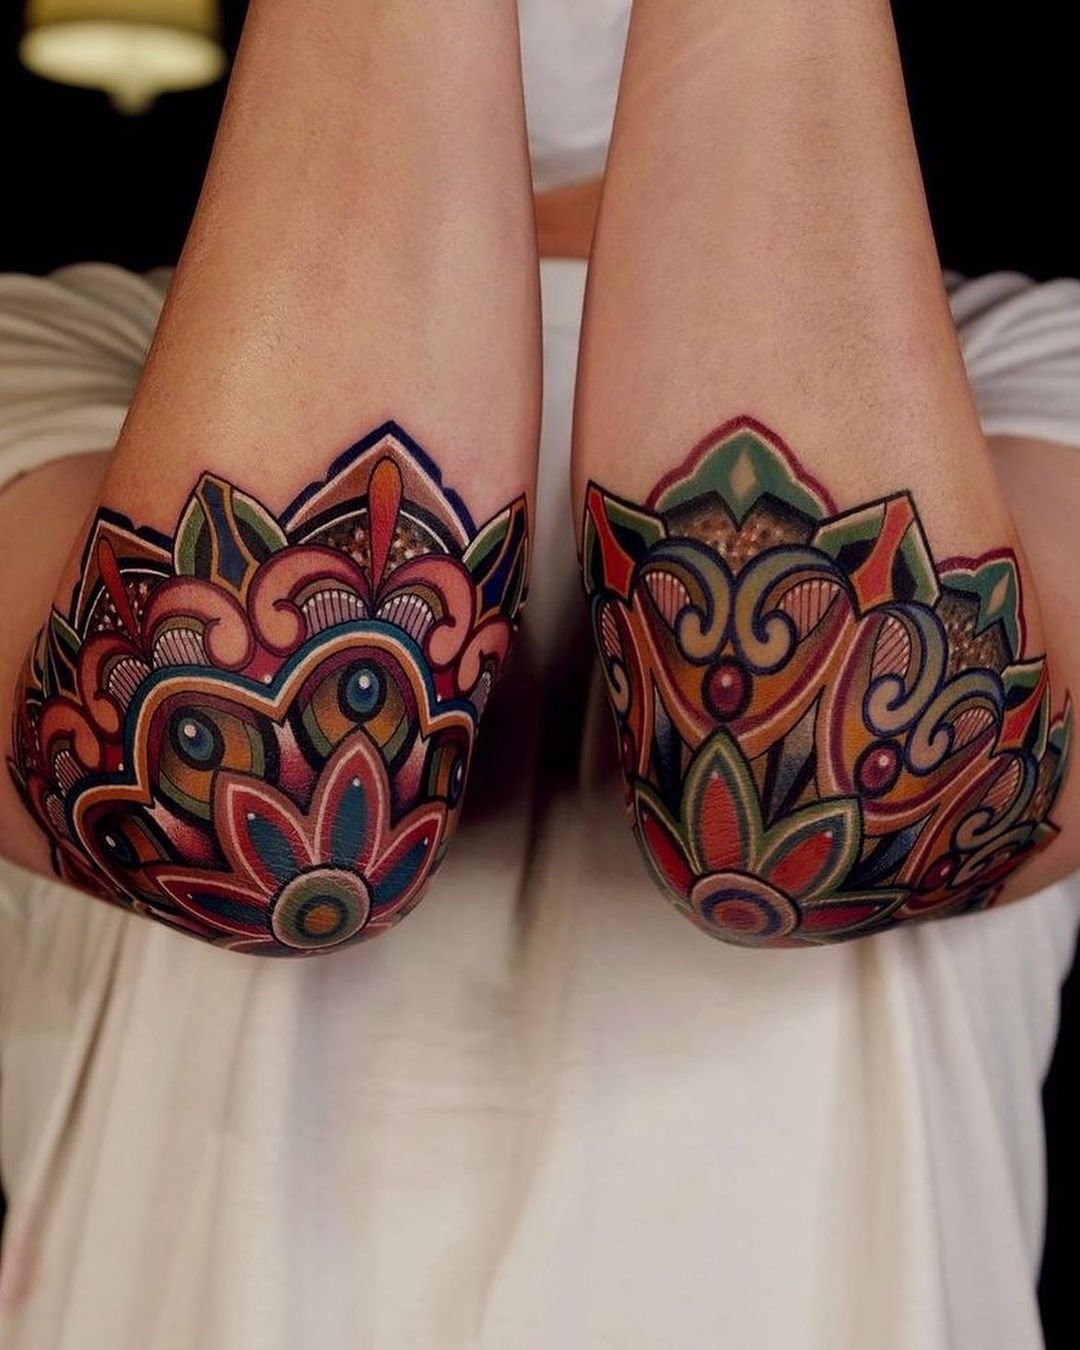 The matching tattoo is for those who like to wear bright and loud designs. Show off your creativity and will to try out new things and your love for mandalas in this way. Heads up since it is a giant tattoo to commit to.